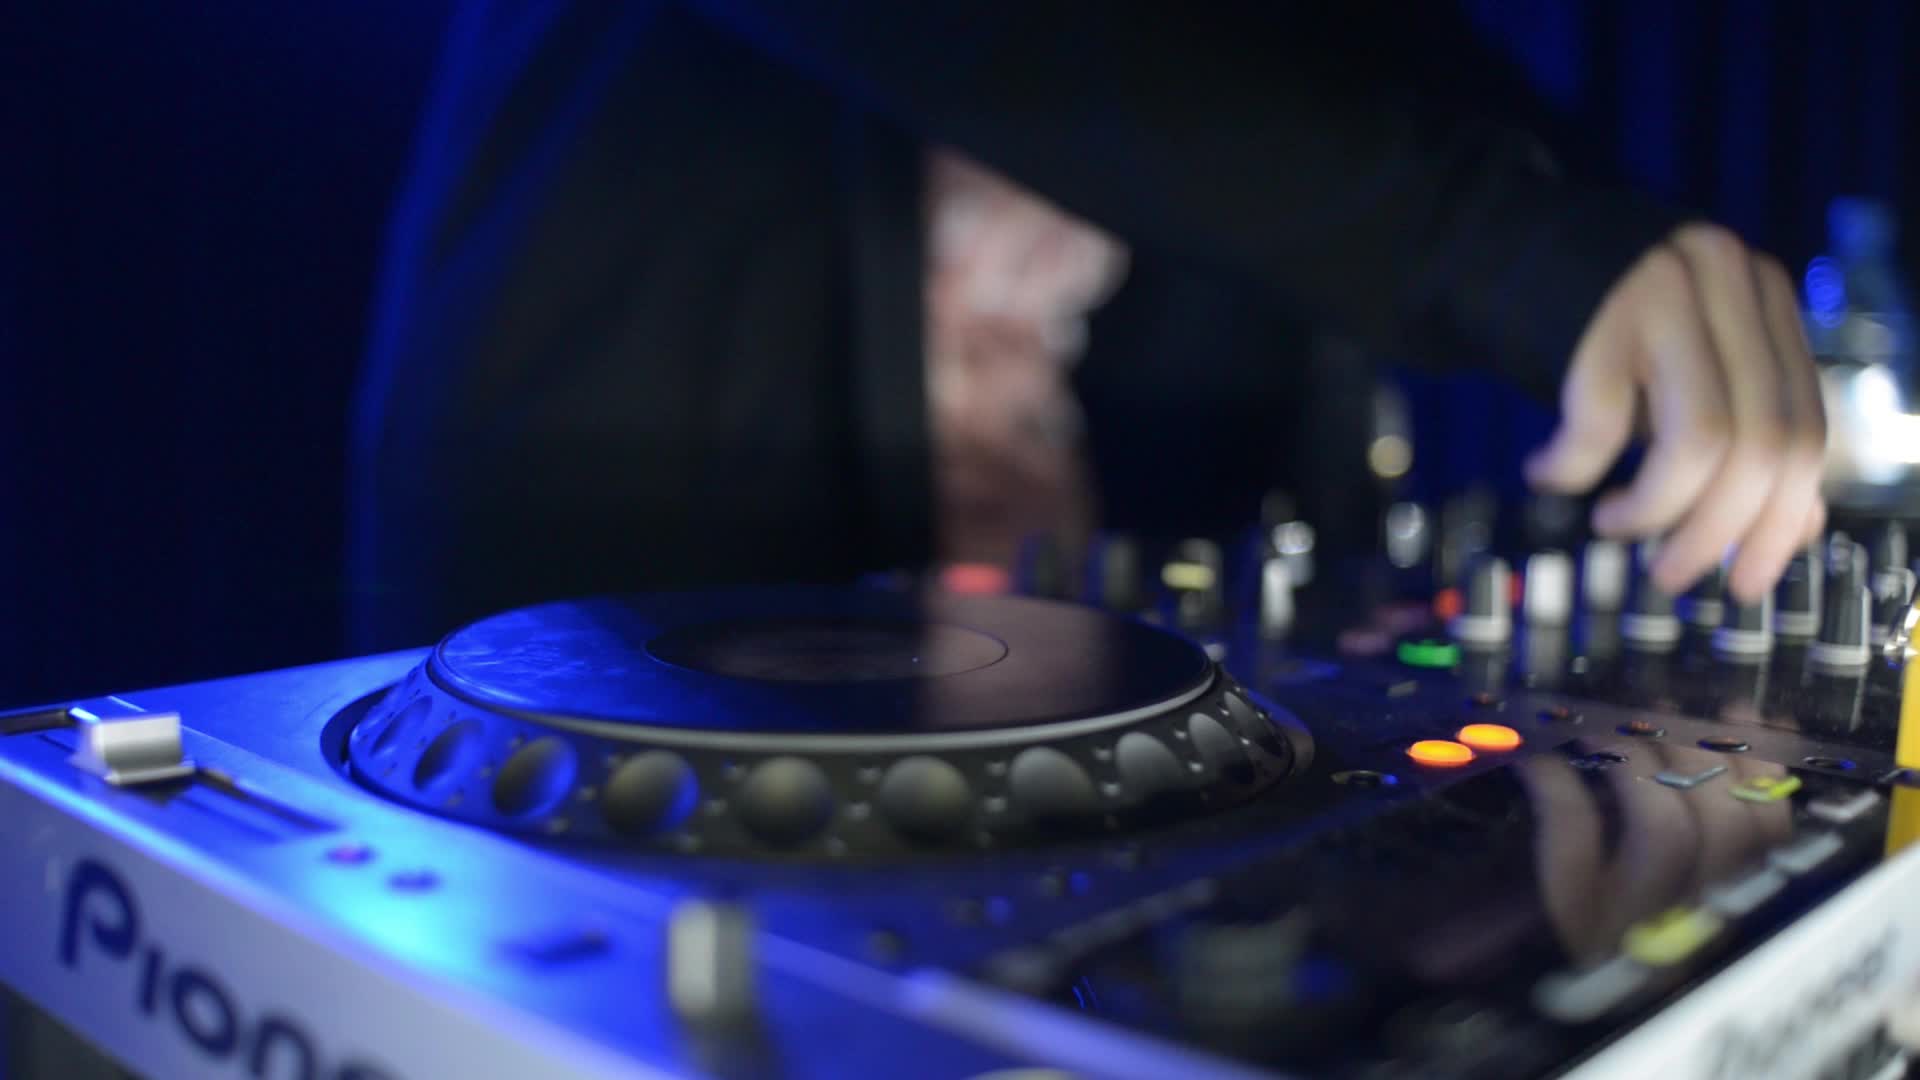 Dj Set Stock Video Footage for Free Download